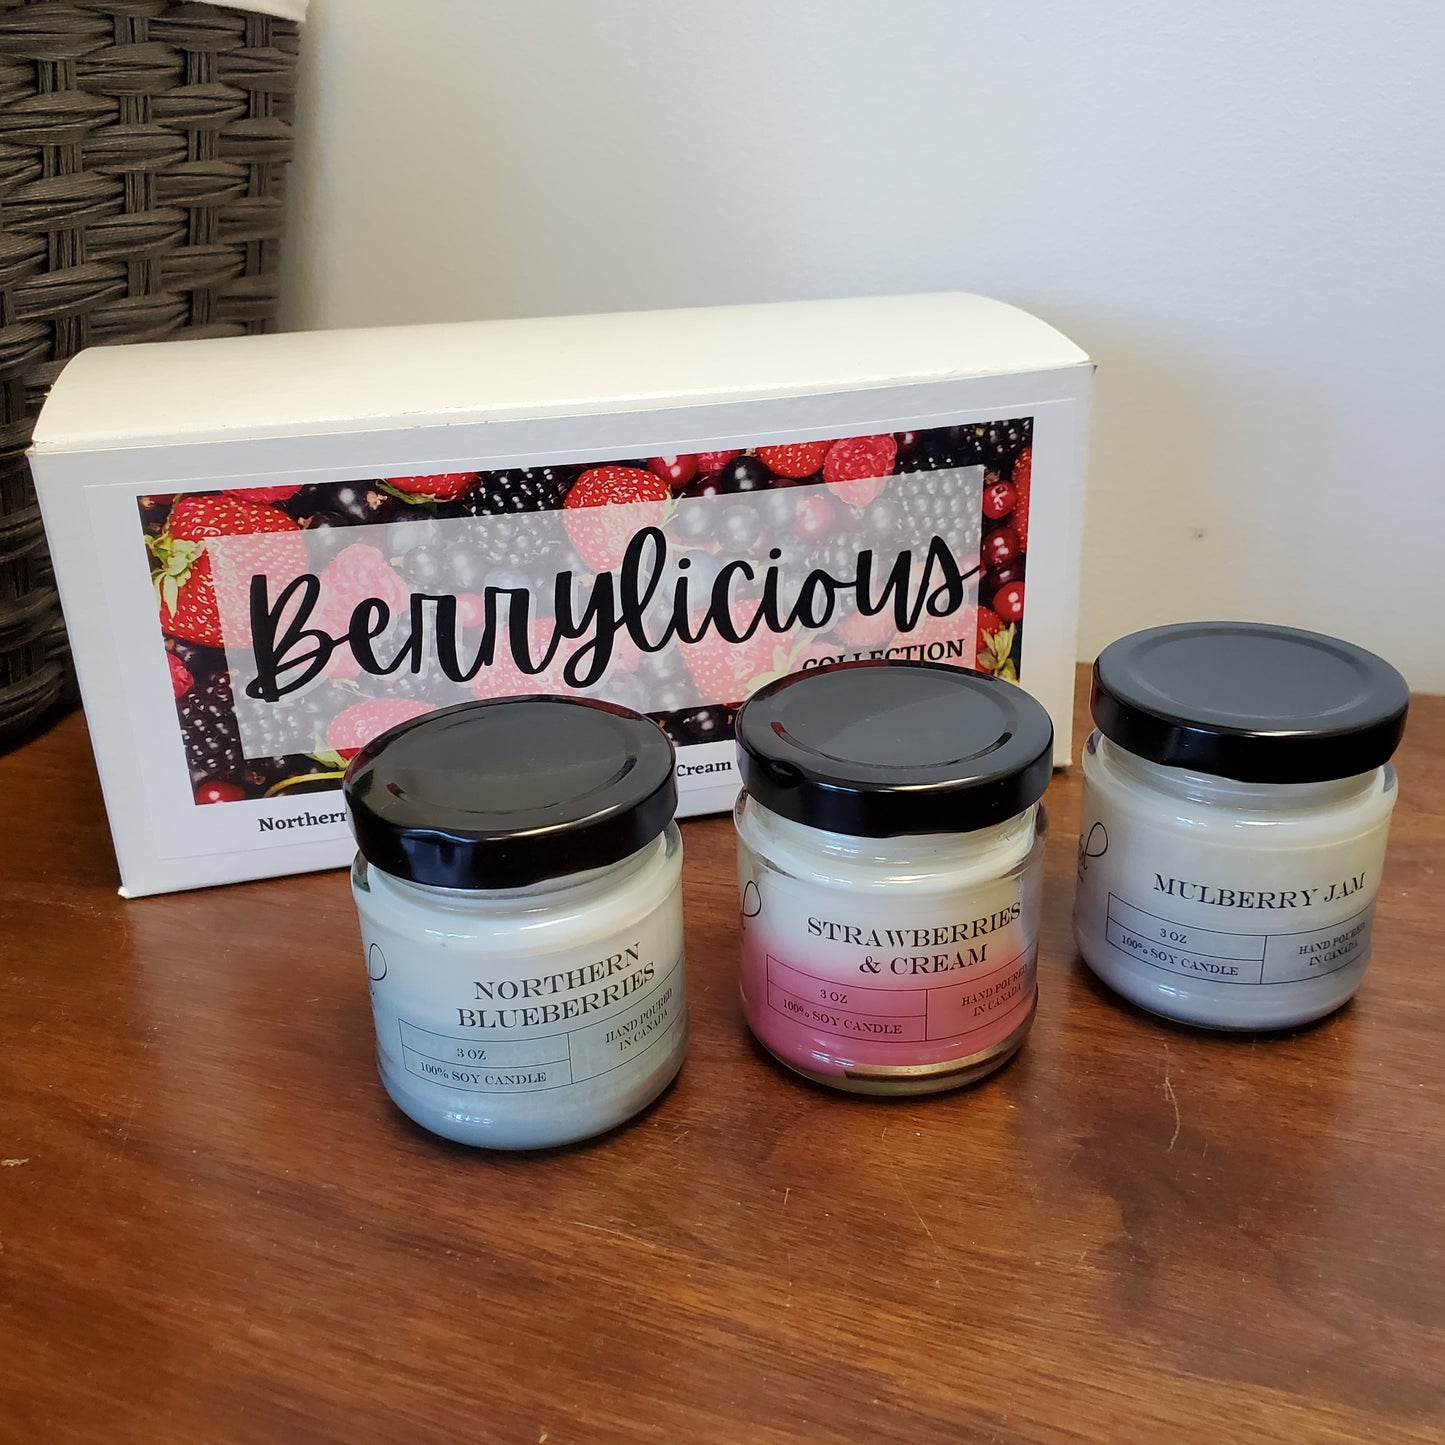 Our Berrylicious Candle Sample Set includes Northern Blueberry, Strawberries & Cream and Mulberry Jam.